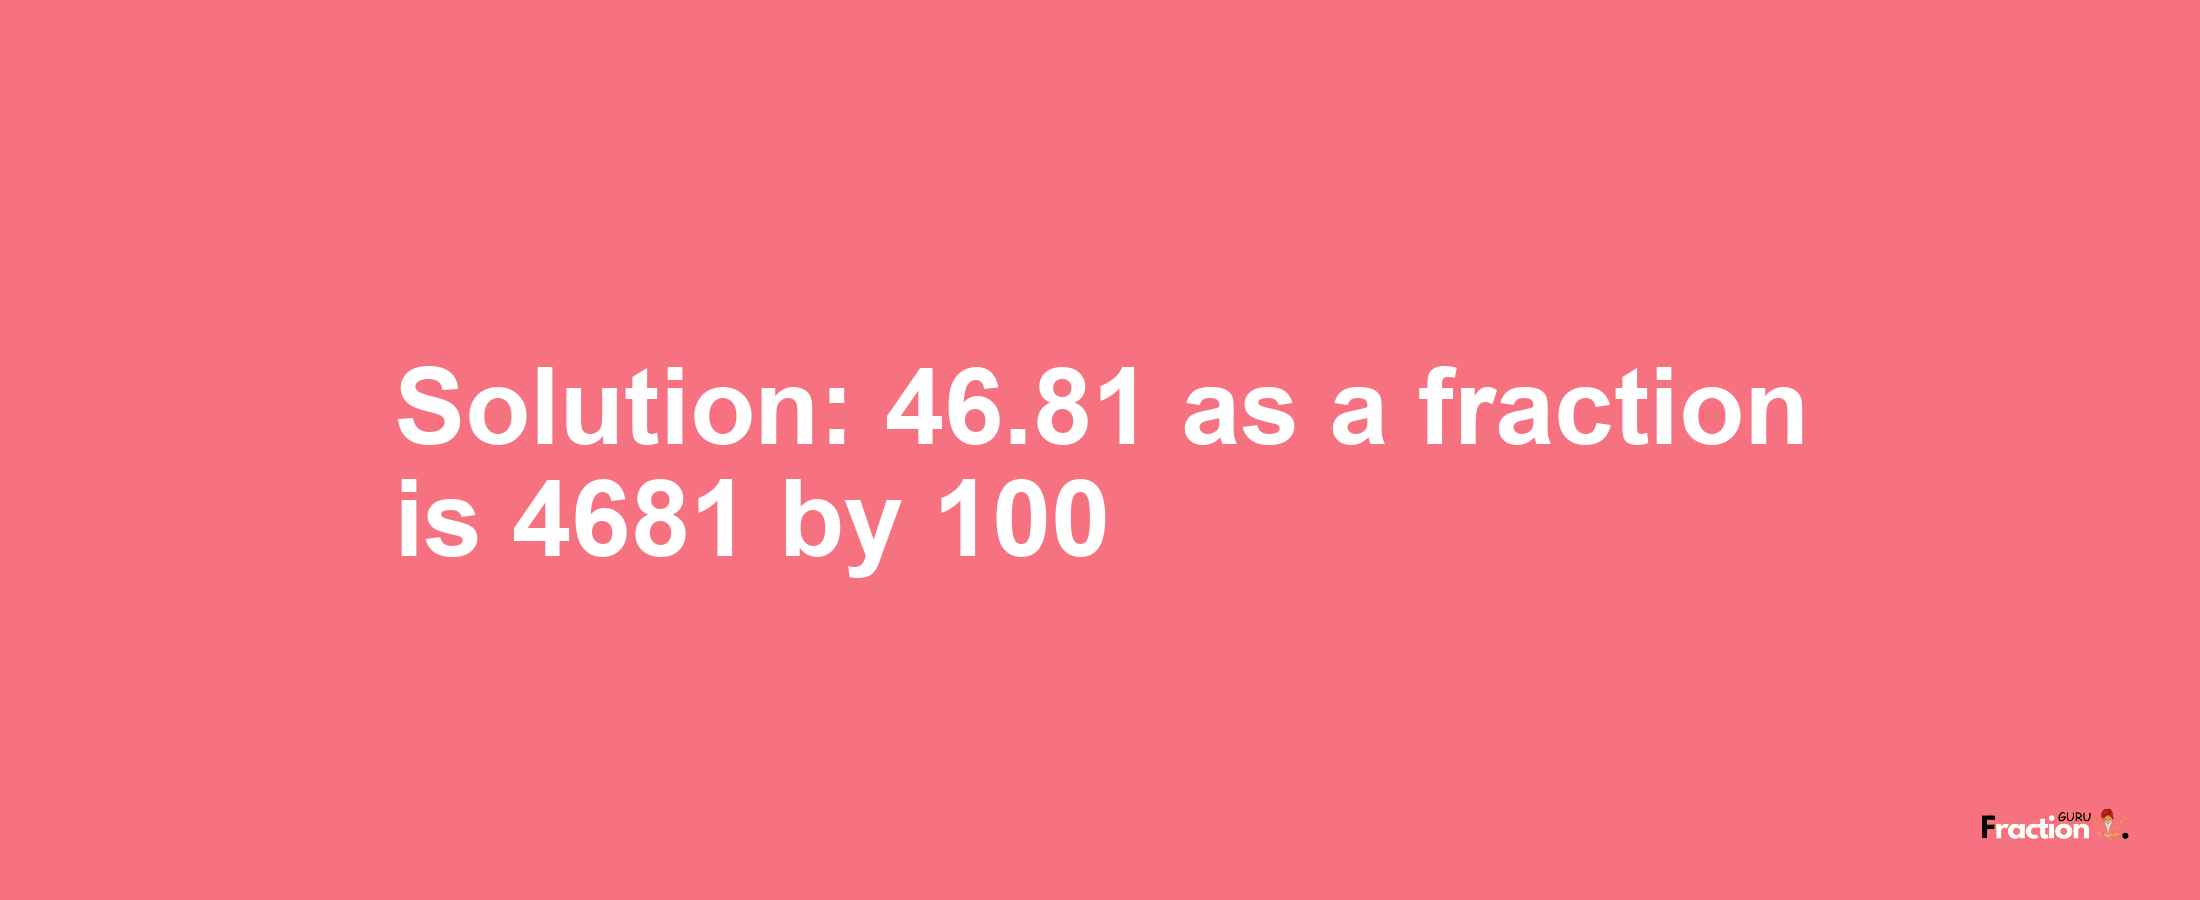 Solution:46.81 as a fraction is 4681/100